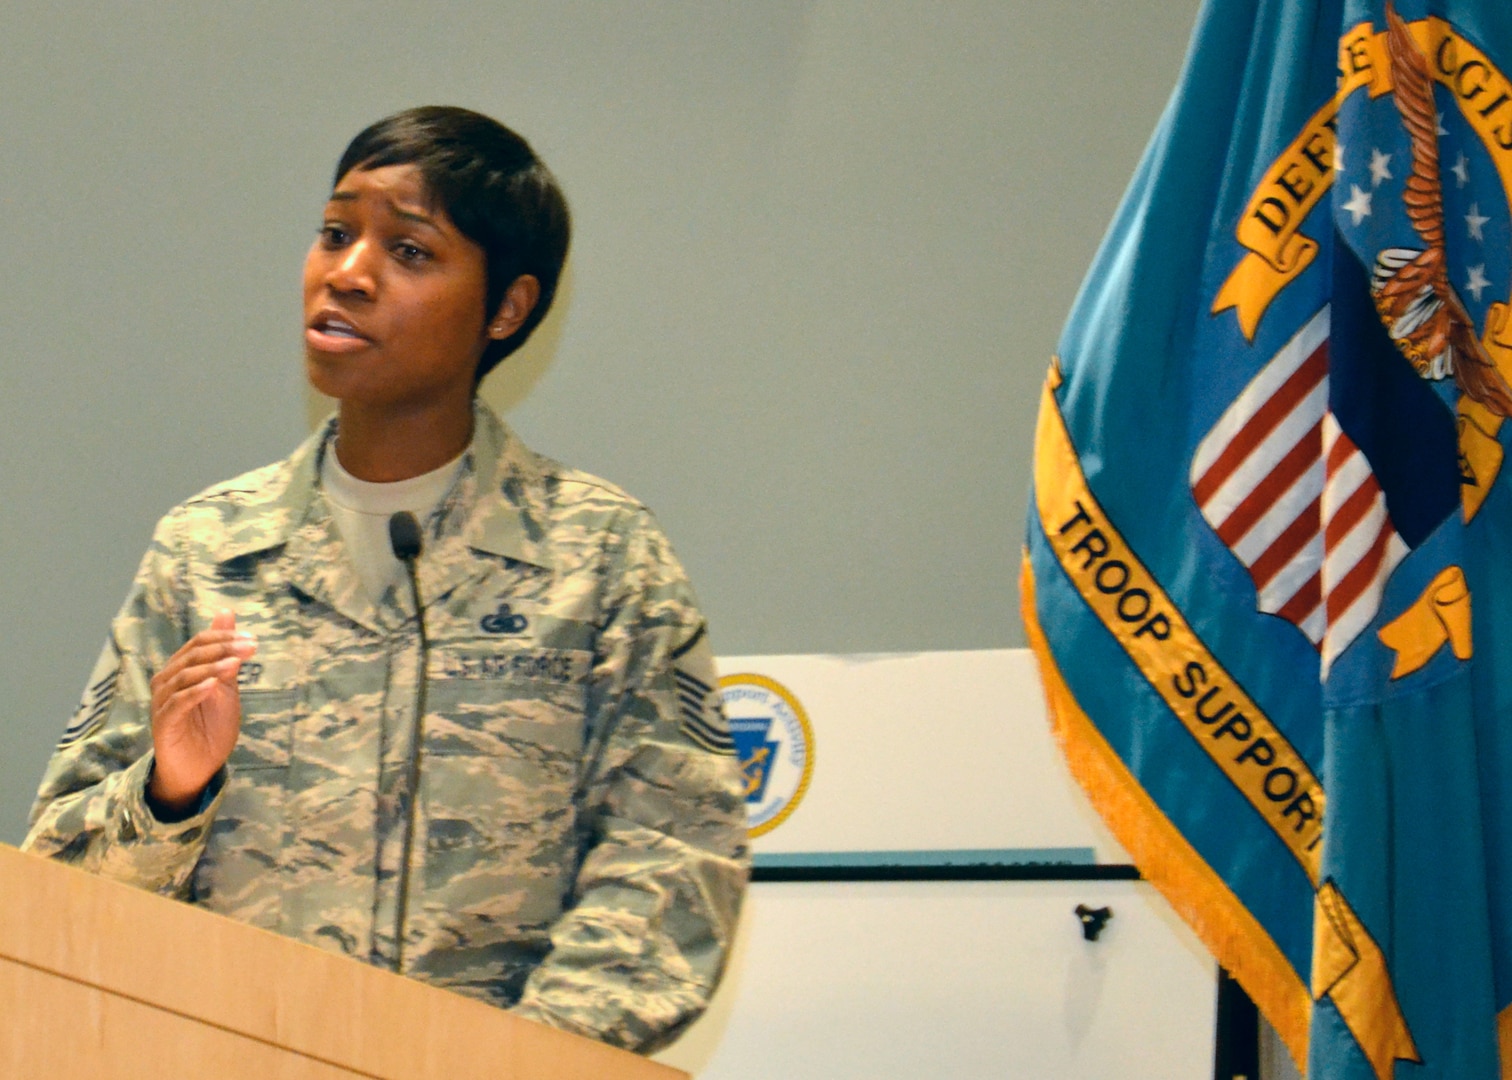 Air Force Master Sgt. Naka Turner shares her story of survival after sexual assault at DLA Troop Support's "Speak Up, Stand Up" empowerment event April 4 in Philadelphia.